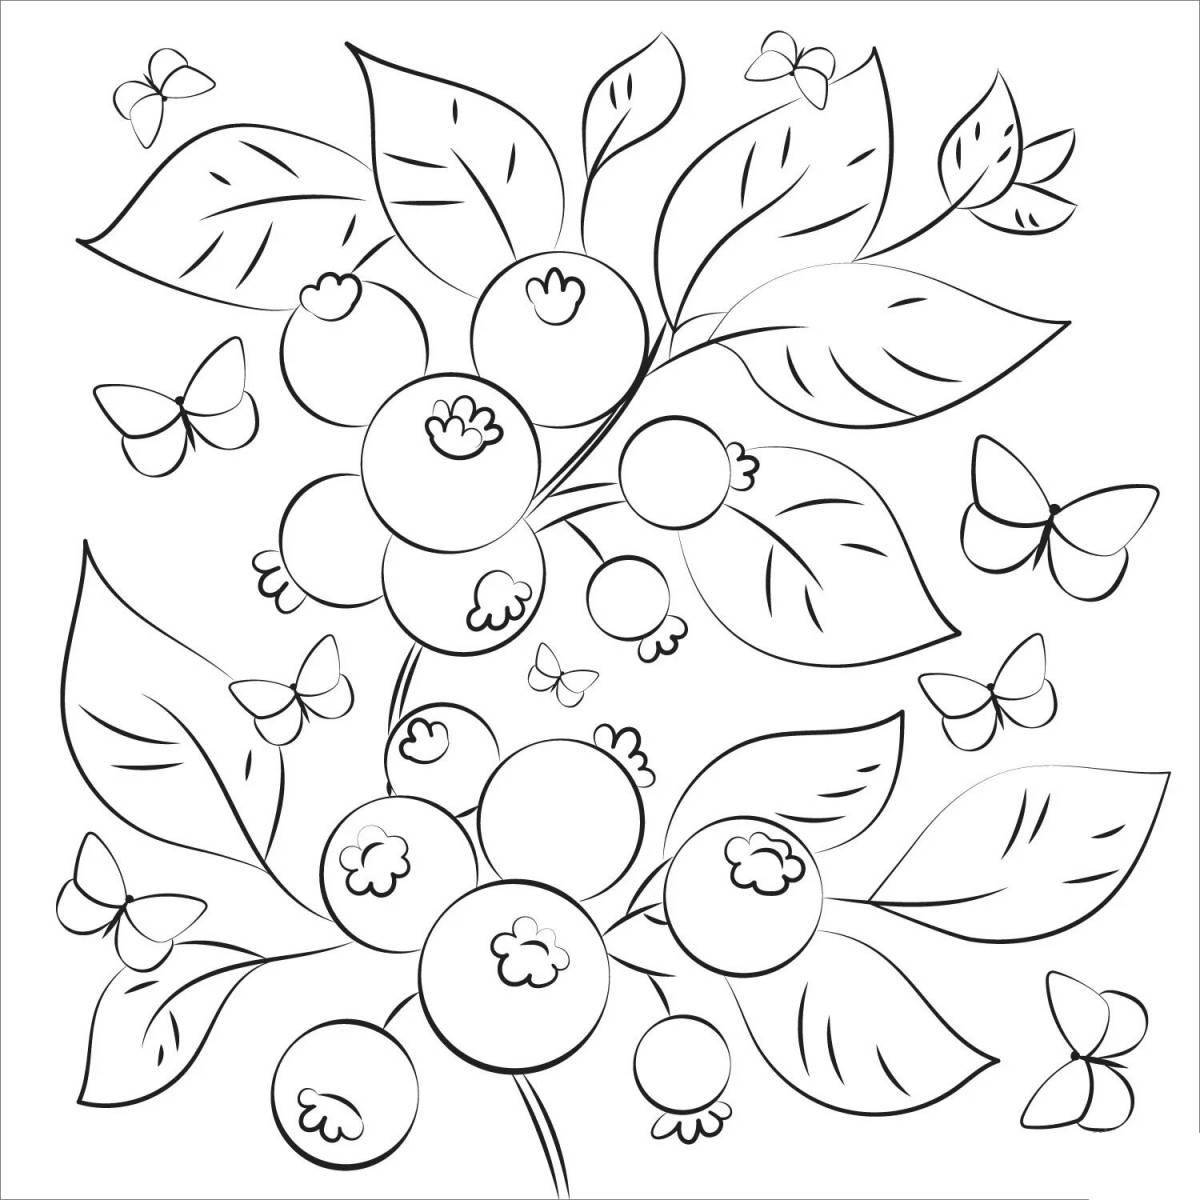 Children's blueberry coloring book